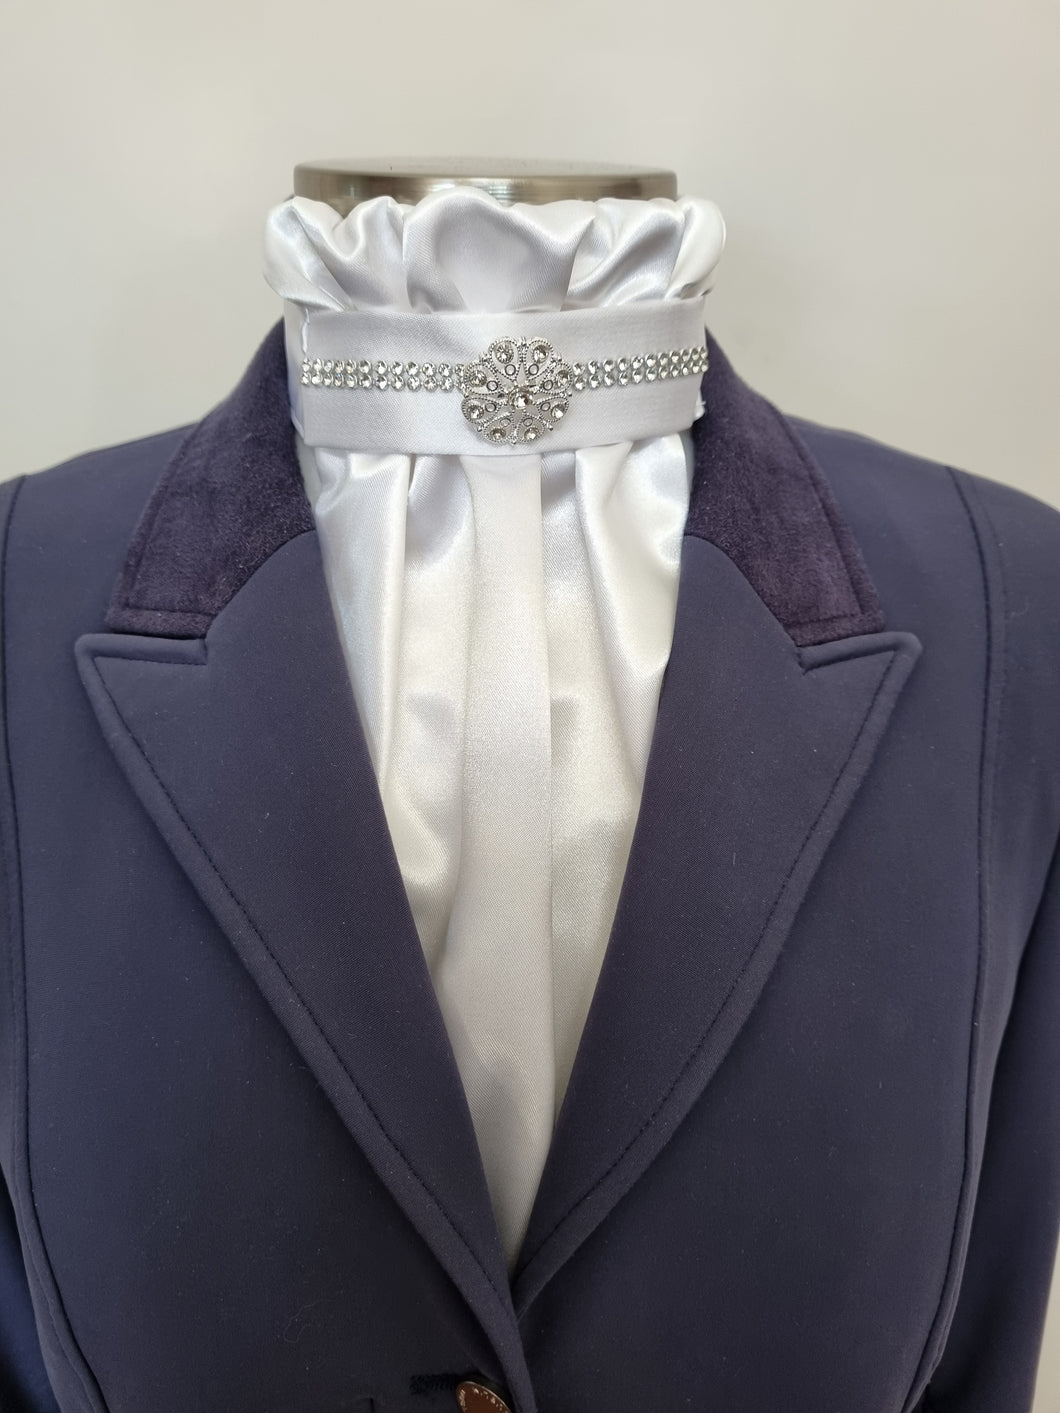 ERA EURO SIMONE Stock Tie – White satin with silver crystal trim and silver brooch